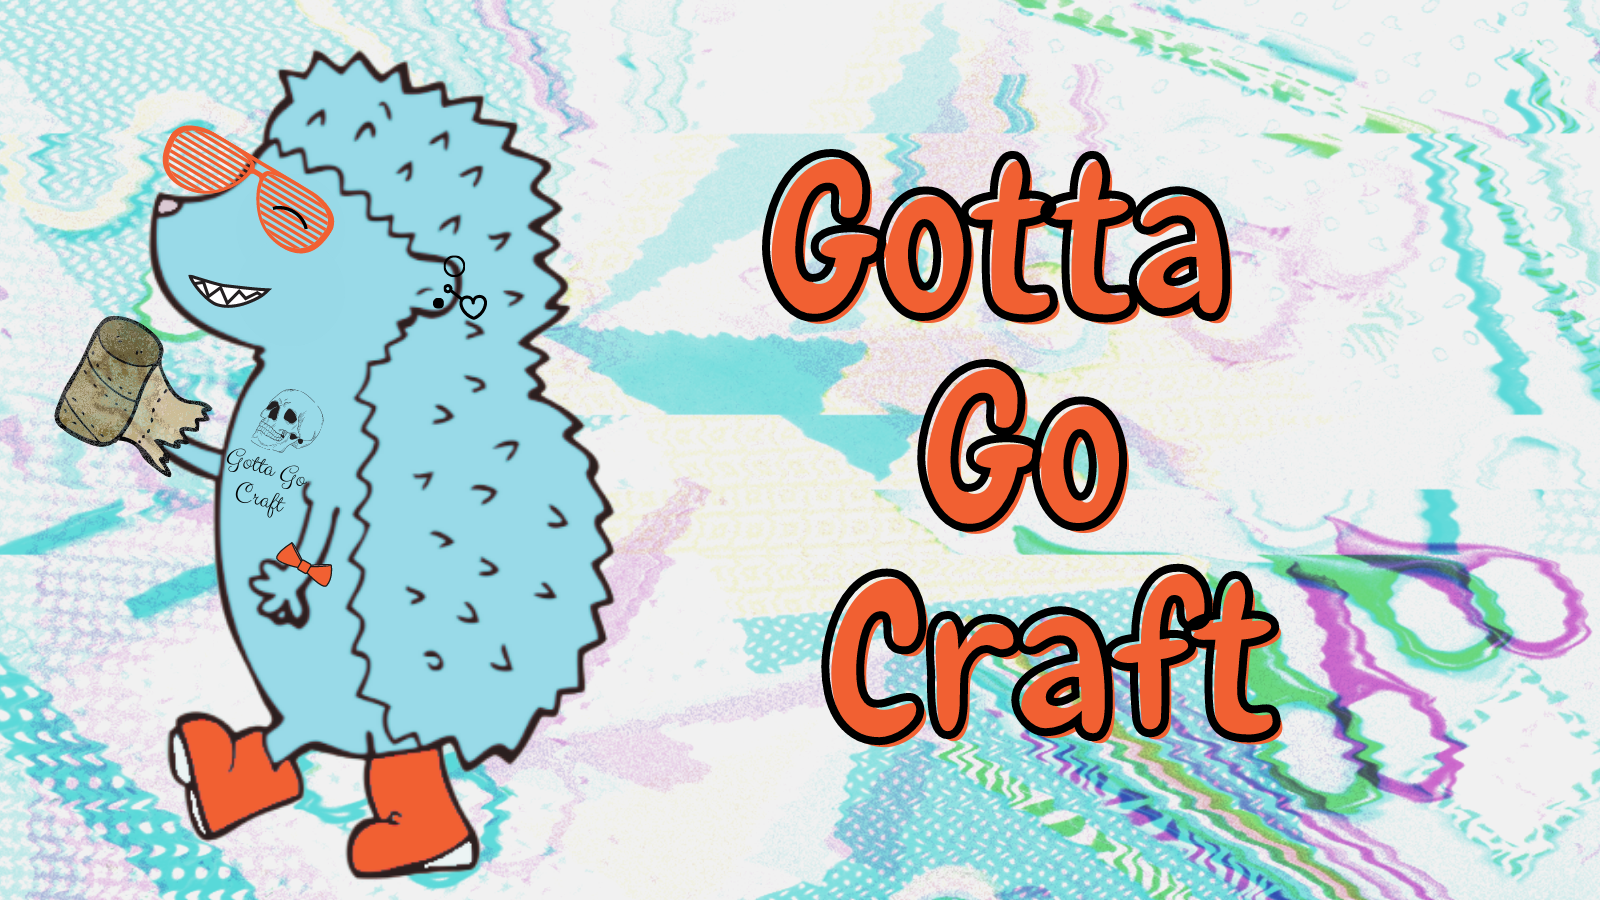 A Blue Hedgehog with Red shoes, ladder shades, tattoos, holding a toilet paper roll stands on a color distorted background of crafting supplies with "Gotta Go Craft" written in large letters.